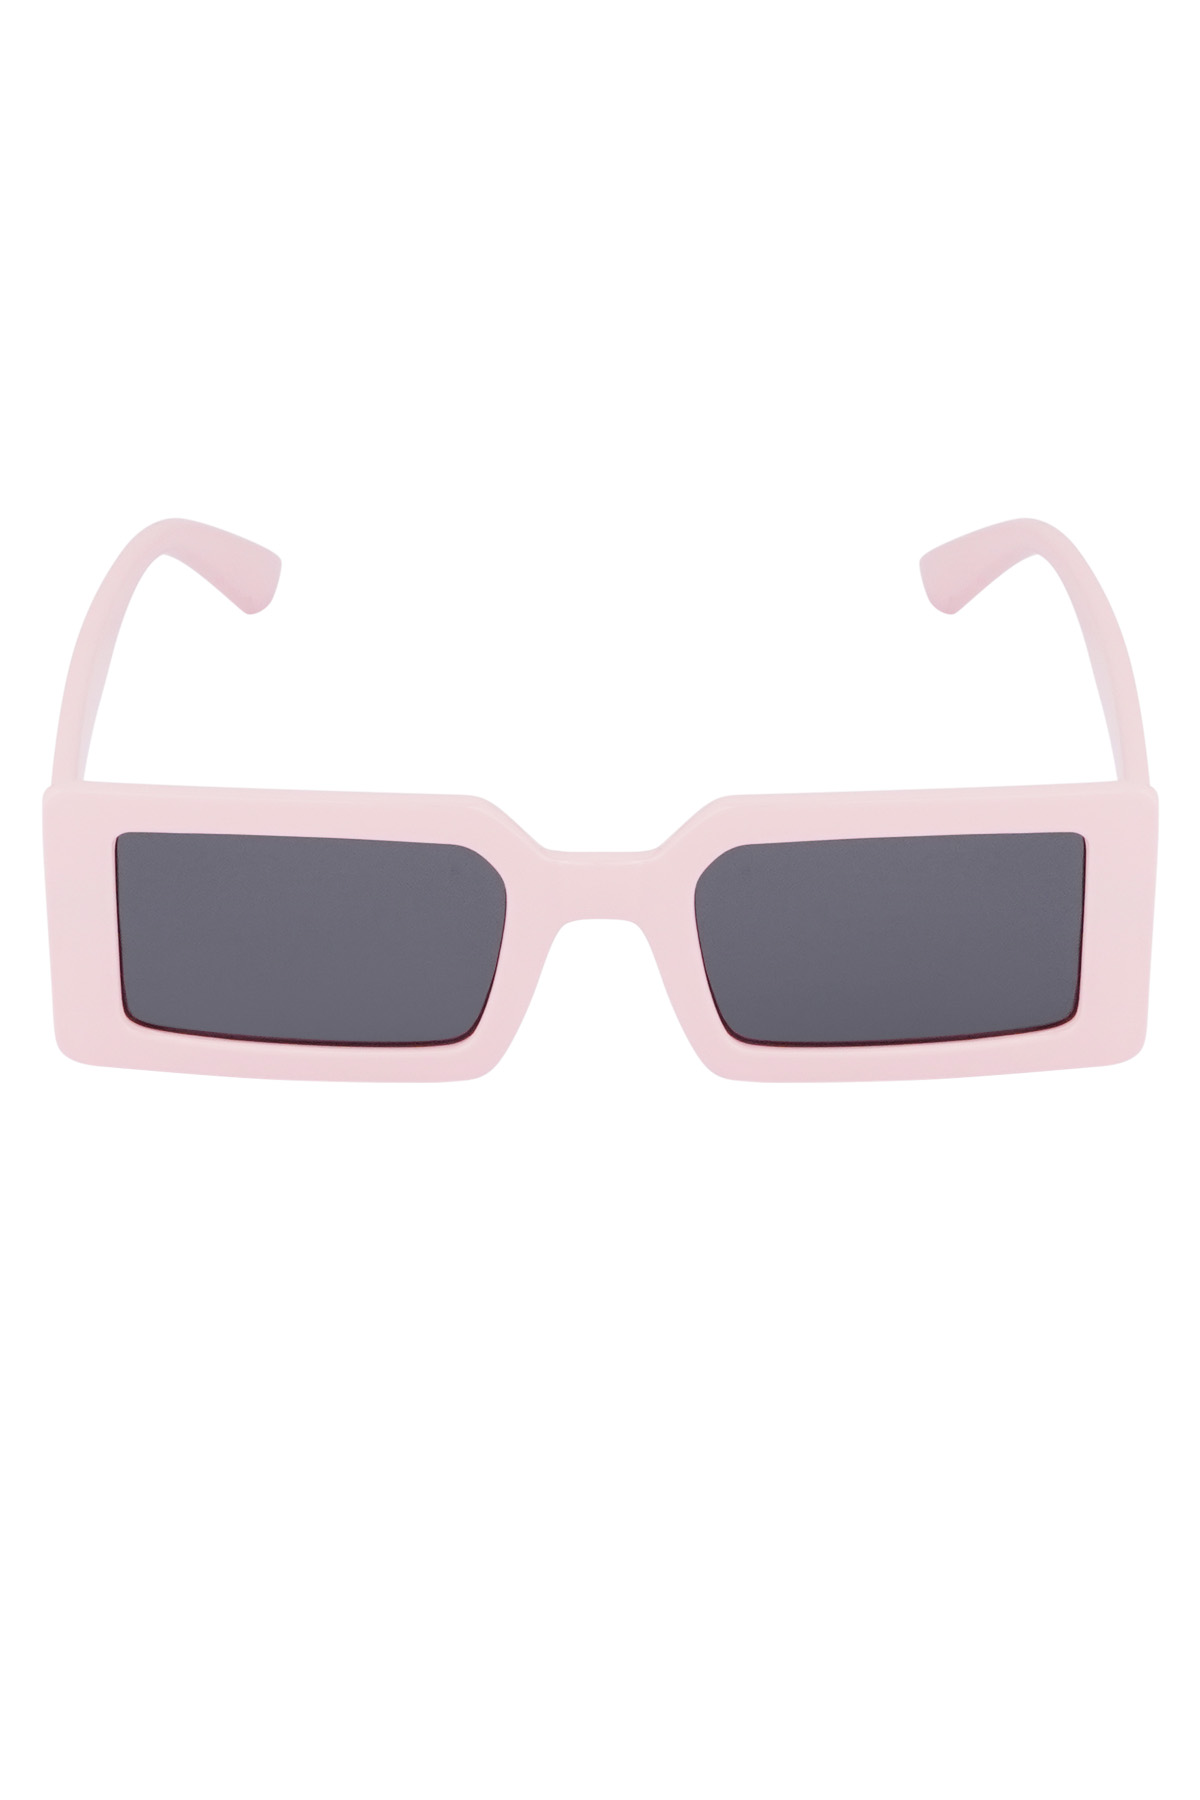 Shimmerglow sunglasses - pink  h5 Picture4